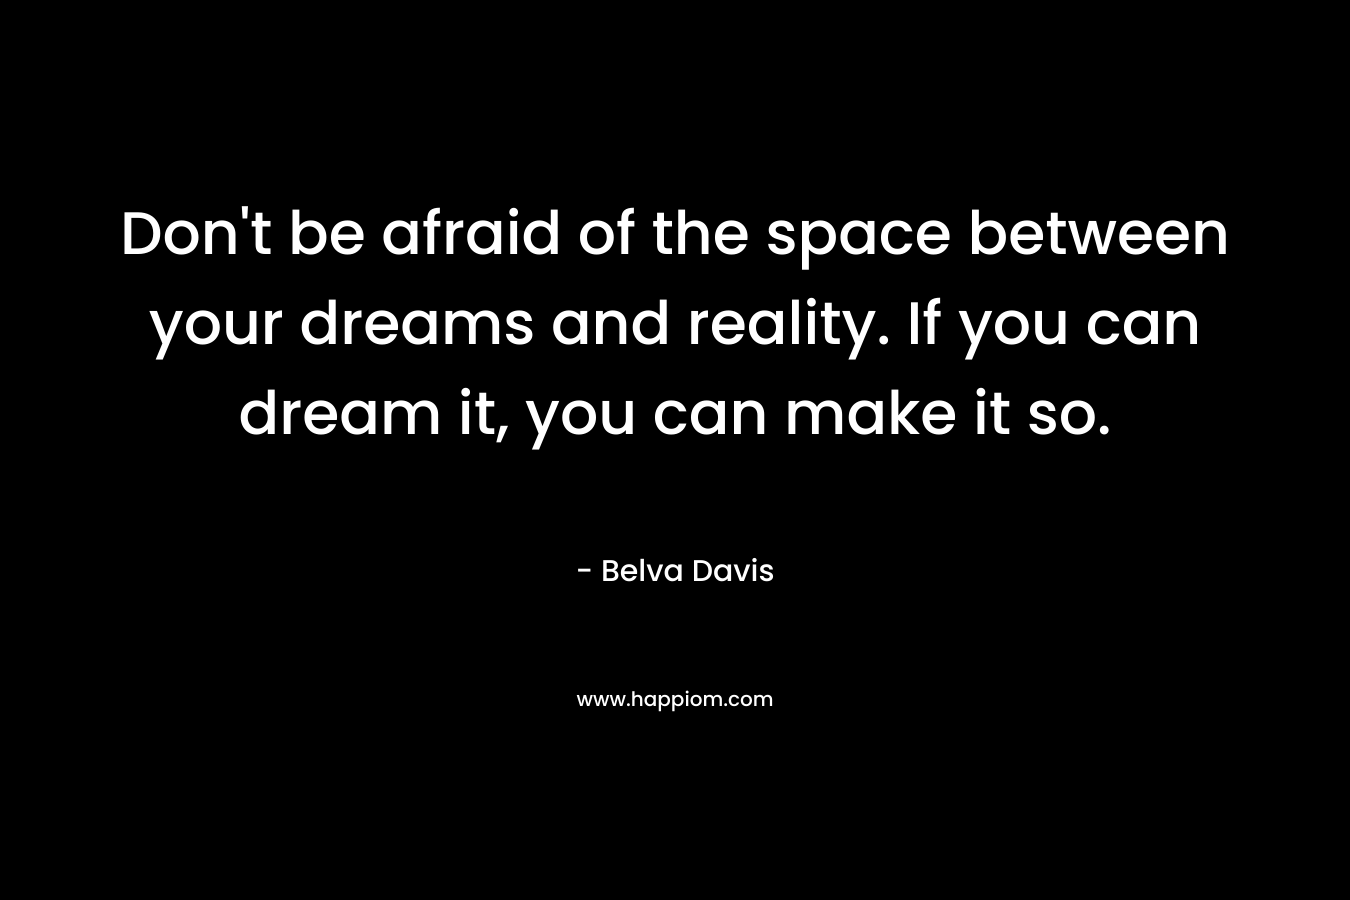 Don’t be afraid of the space between your dreams and reality. If you can dream it, you can make it so. – Belva Davis